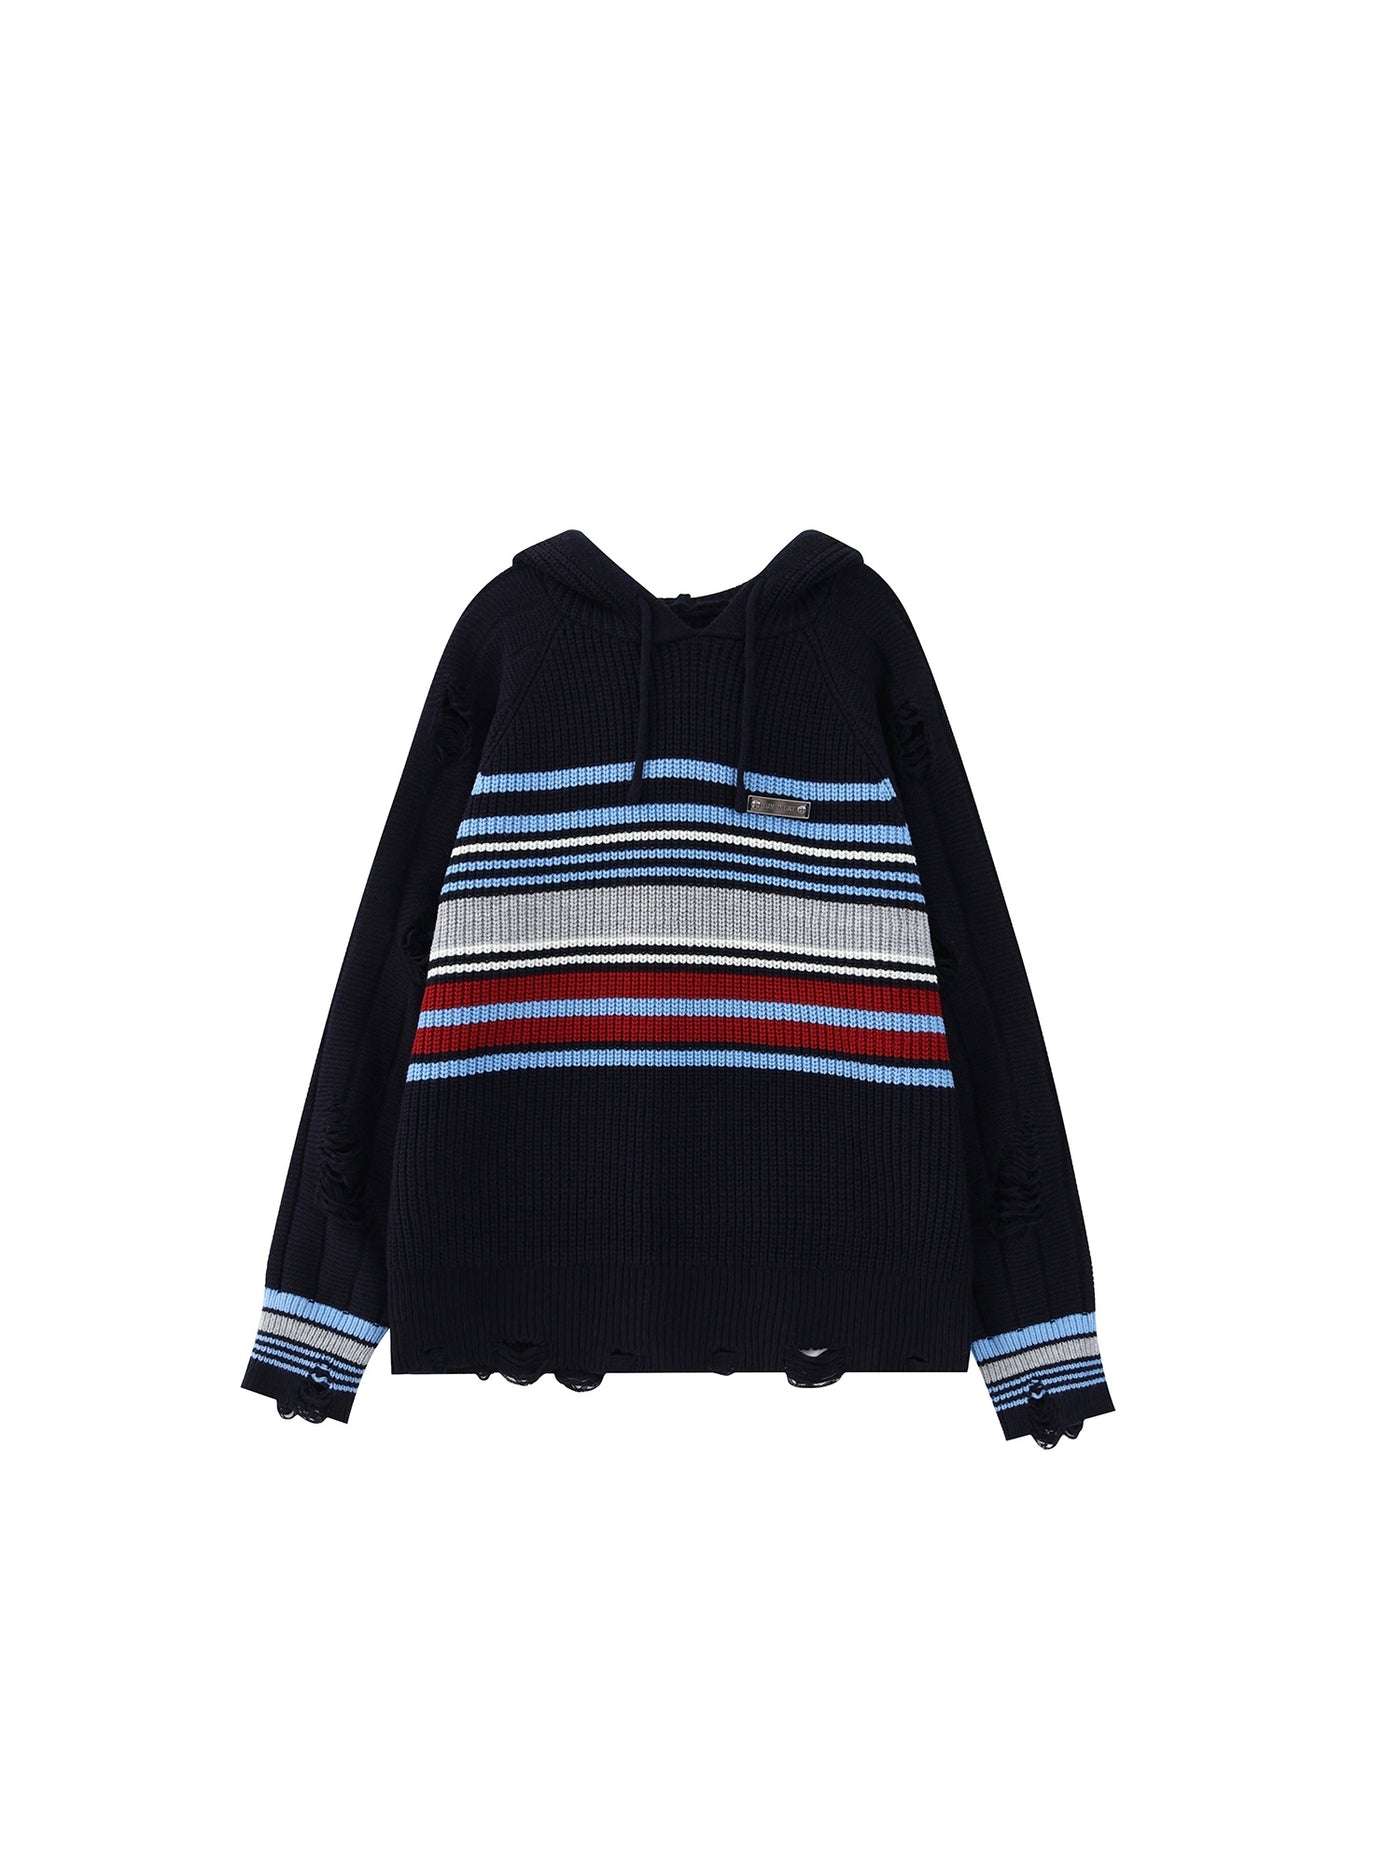 【TR BRUSHSHIFT】Multiple line over mid-damage knit hoodie  TB0018